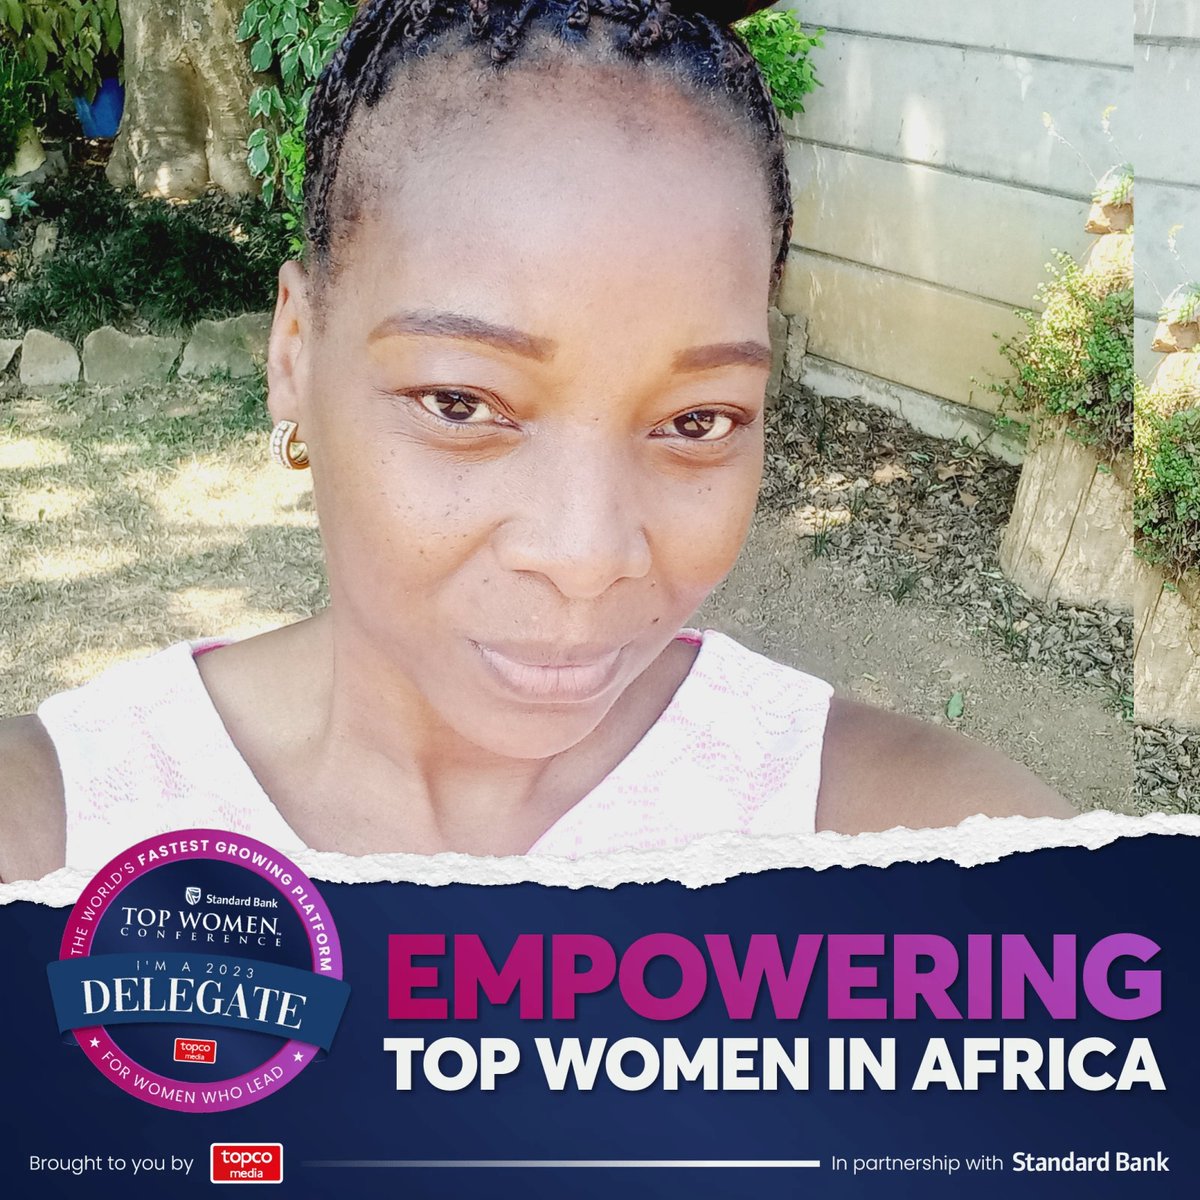 The Importance of Women Empowerment in Africa is increasingly growing. Let's Change the Stereotypes. 
#RiseAboveTheNoise
#SBTopWomen